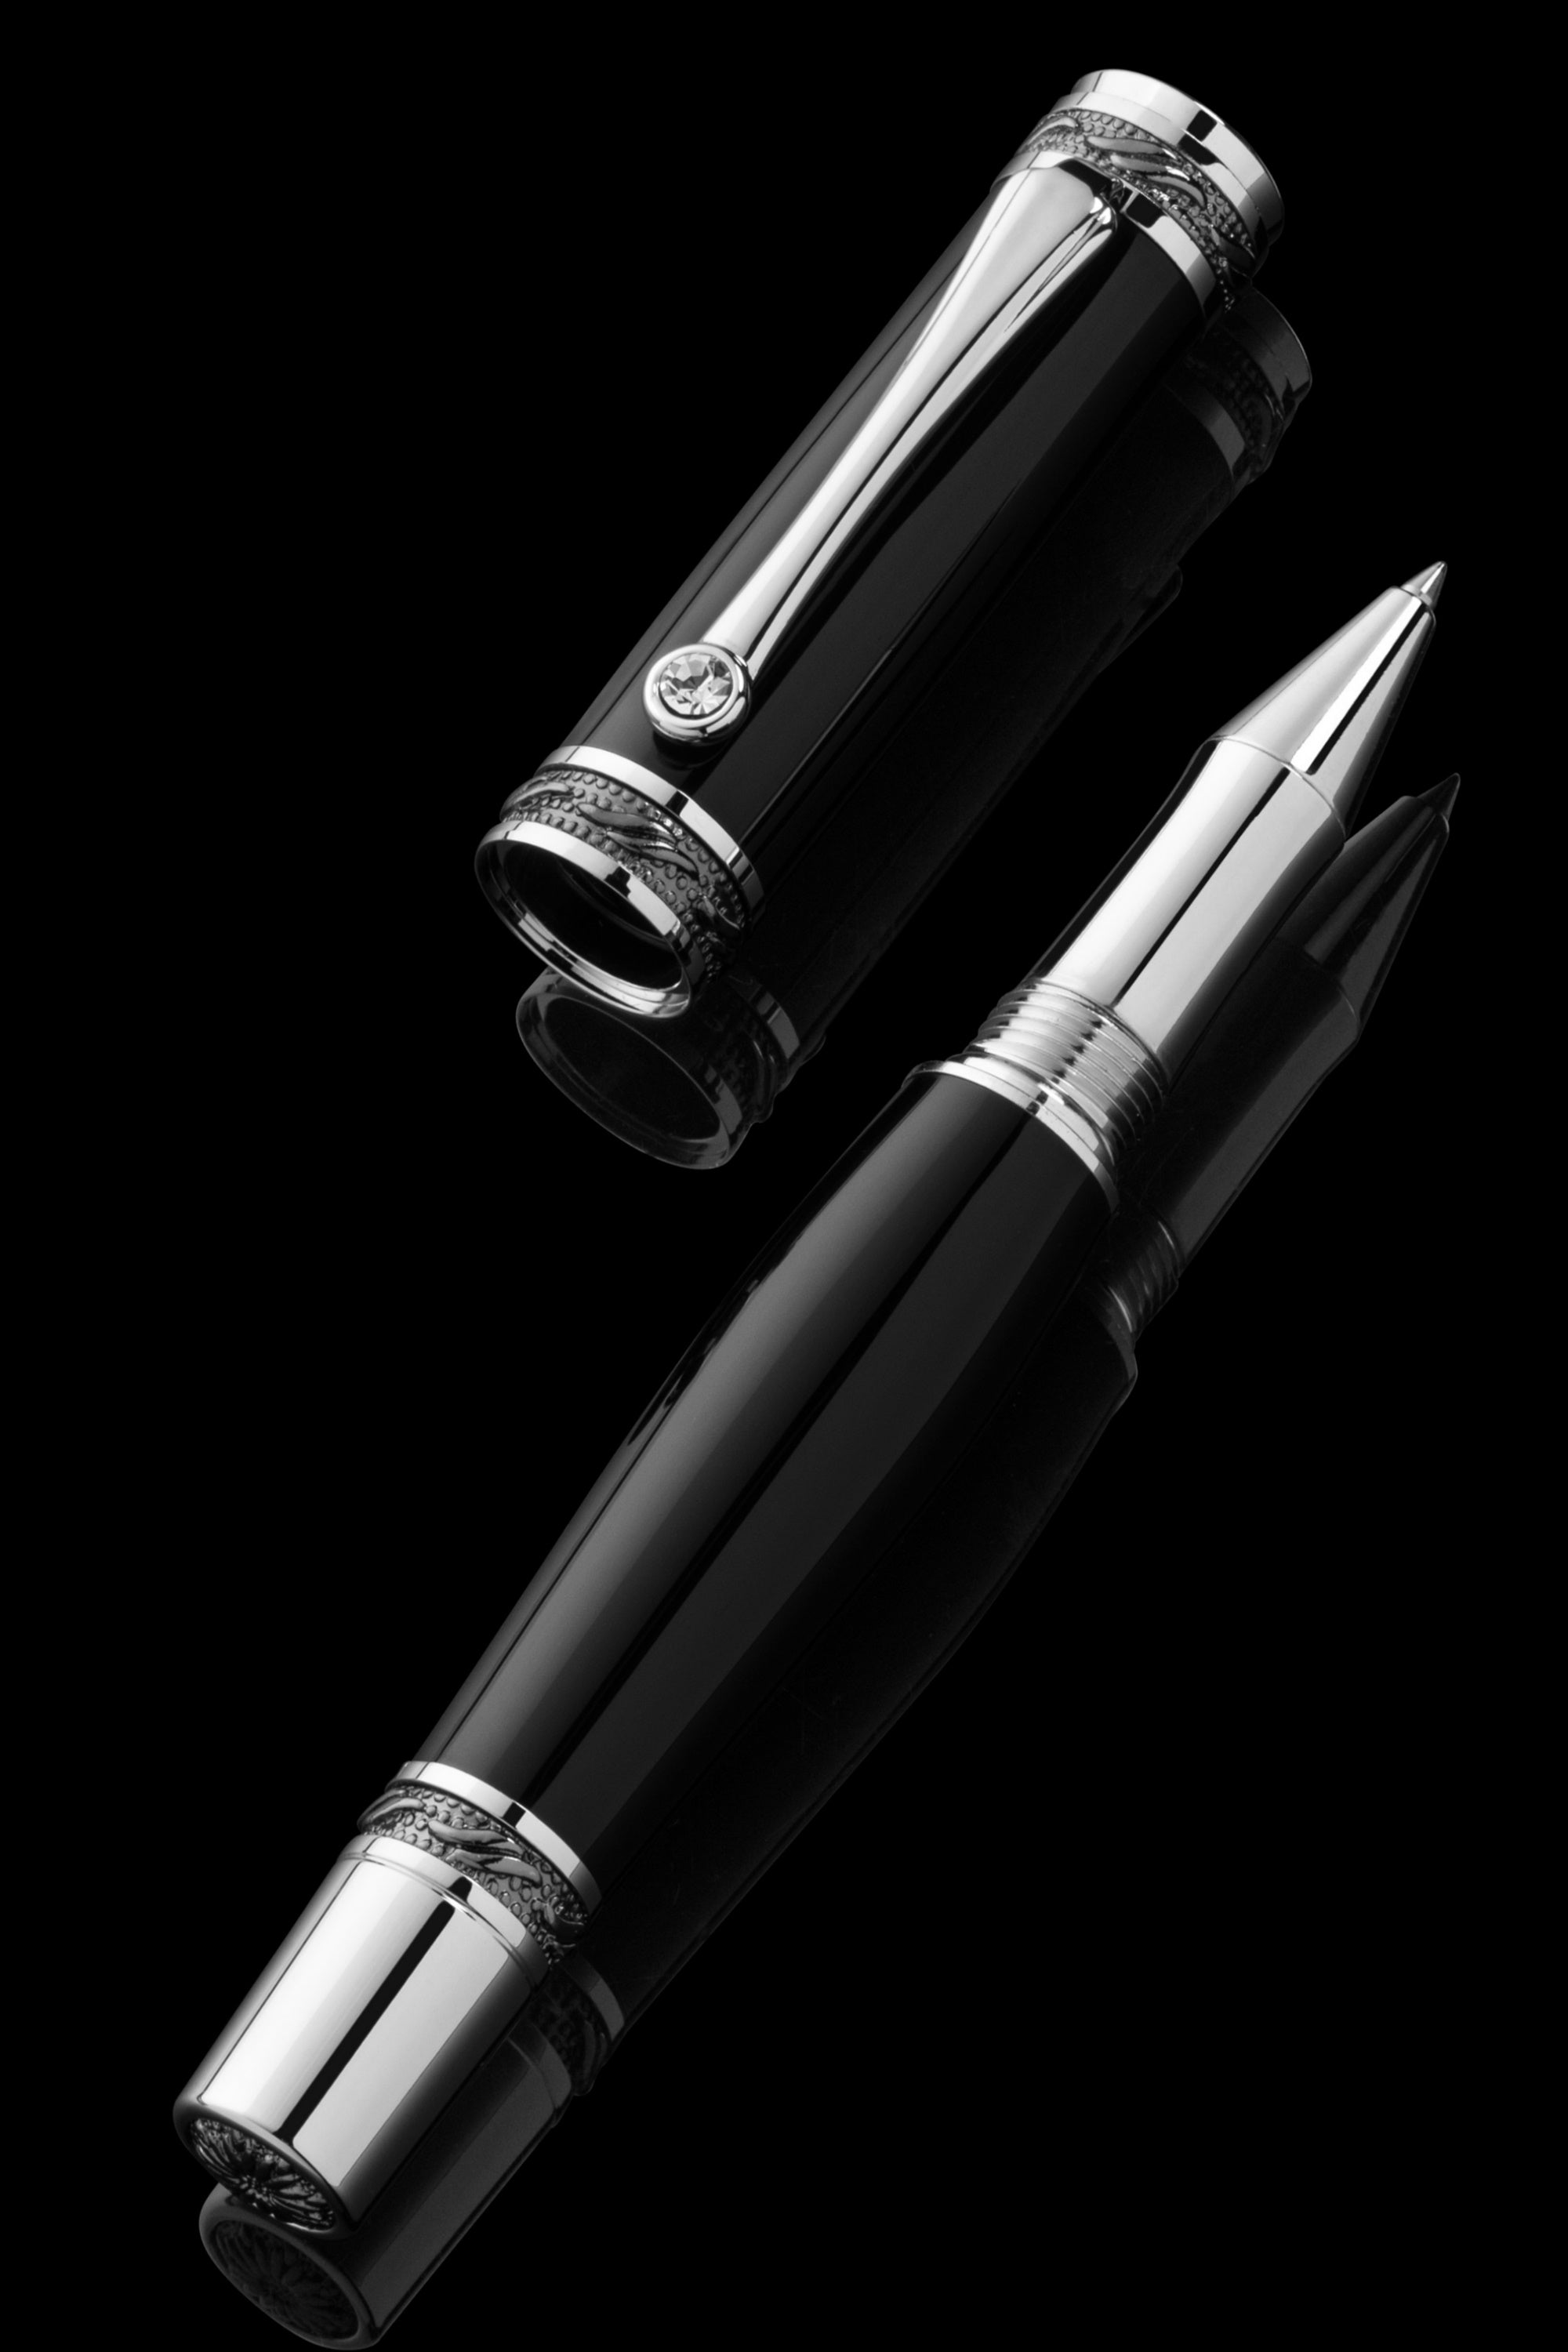 Pitchman Tycoon Black Rollerball Pen | Best Expensive Pen